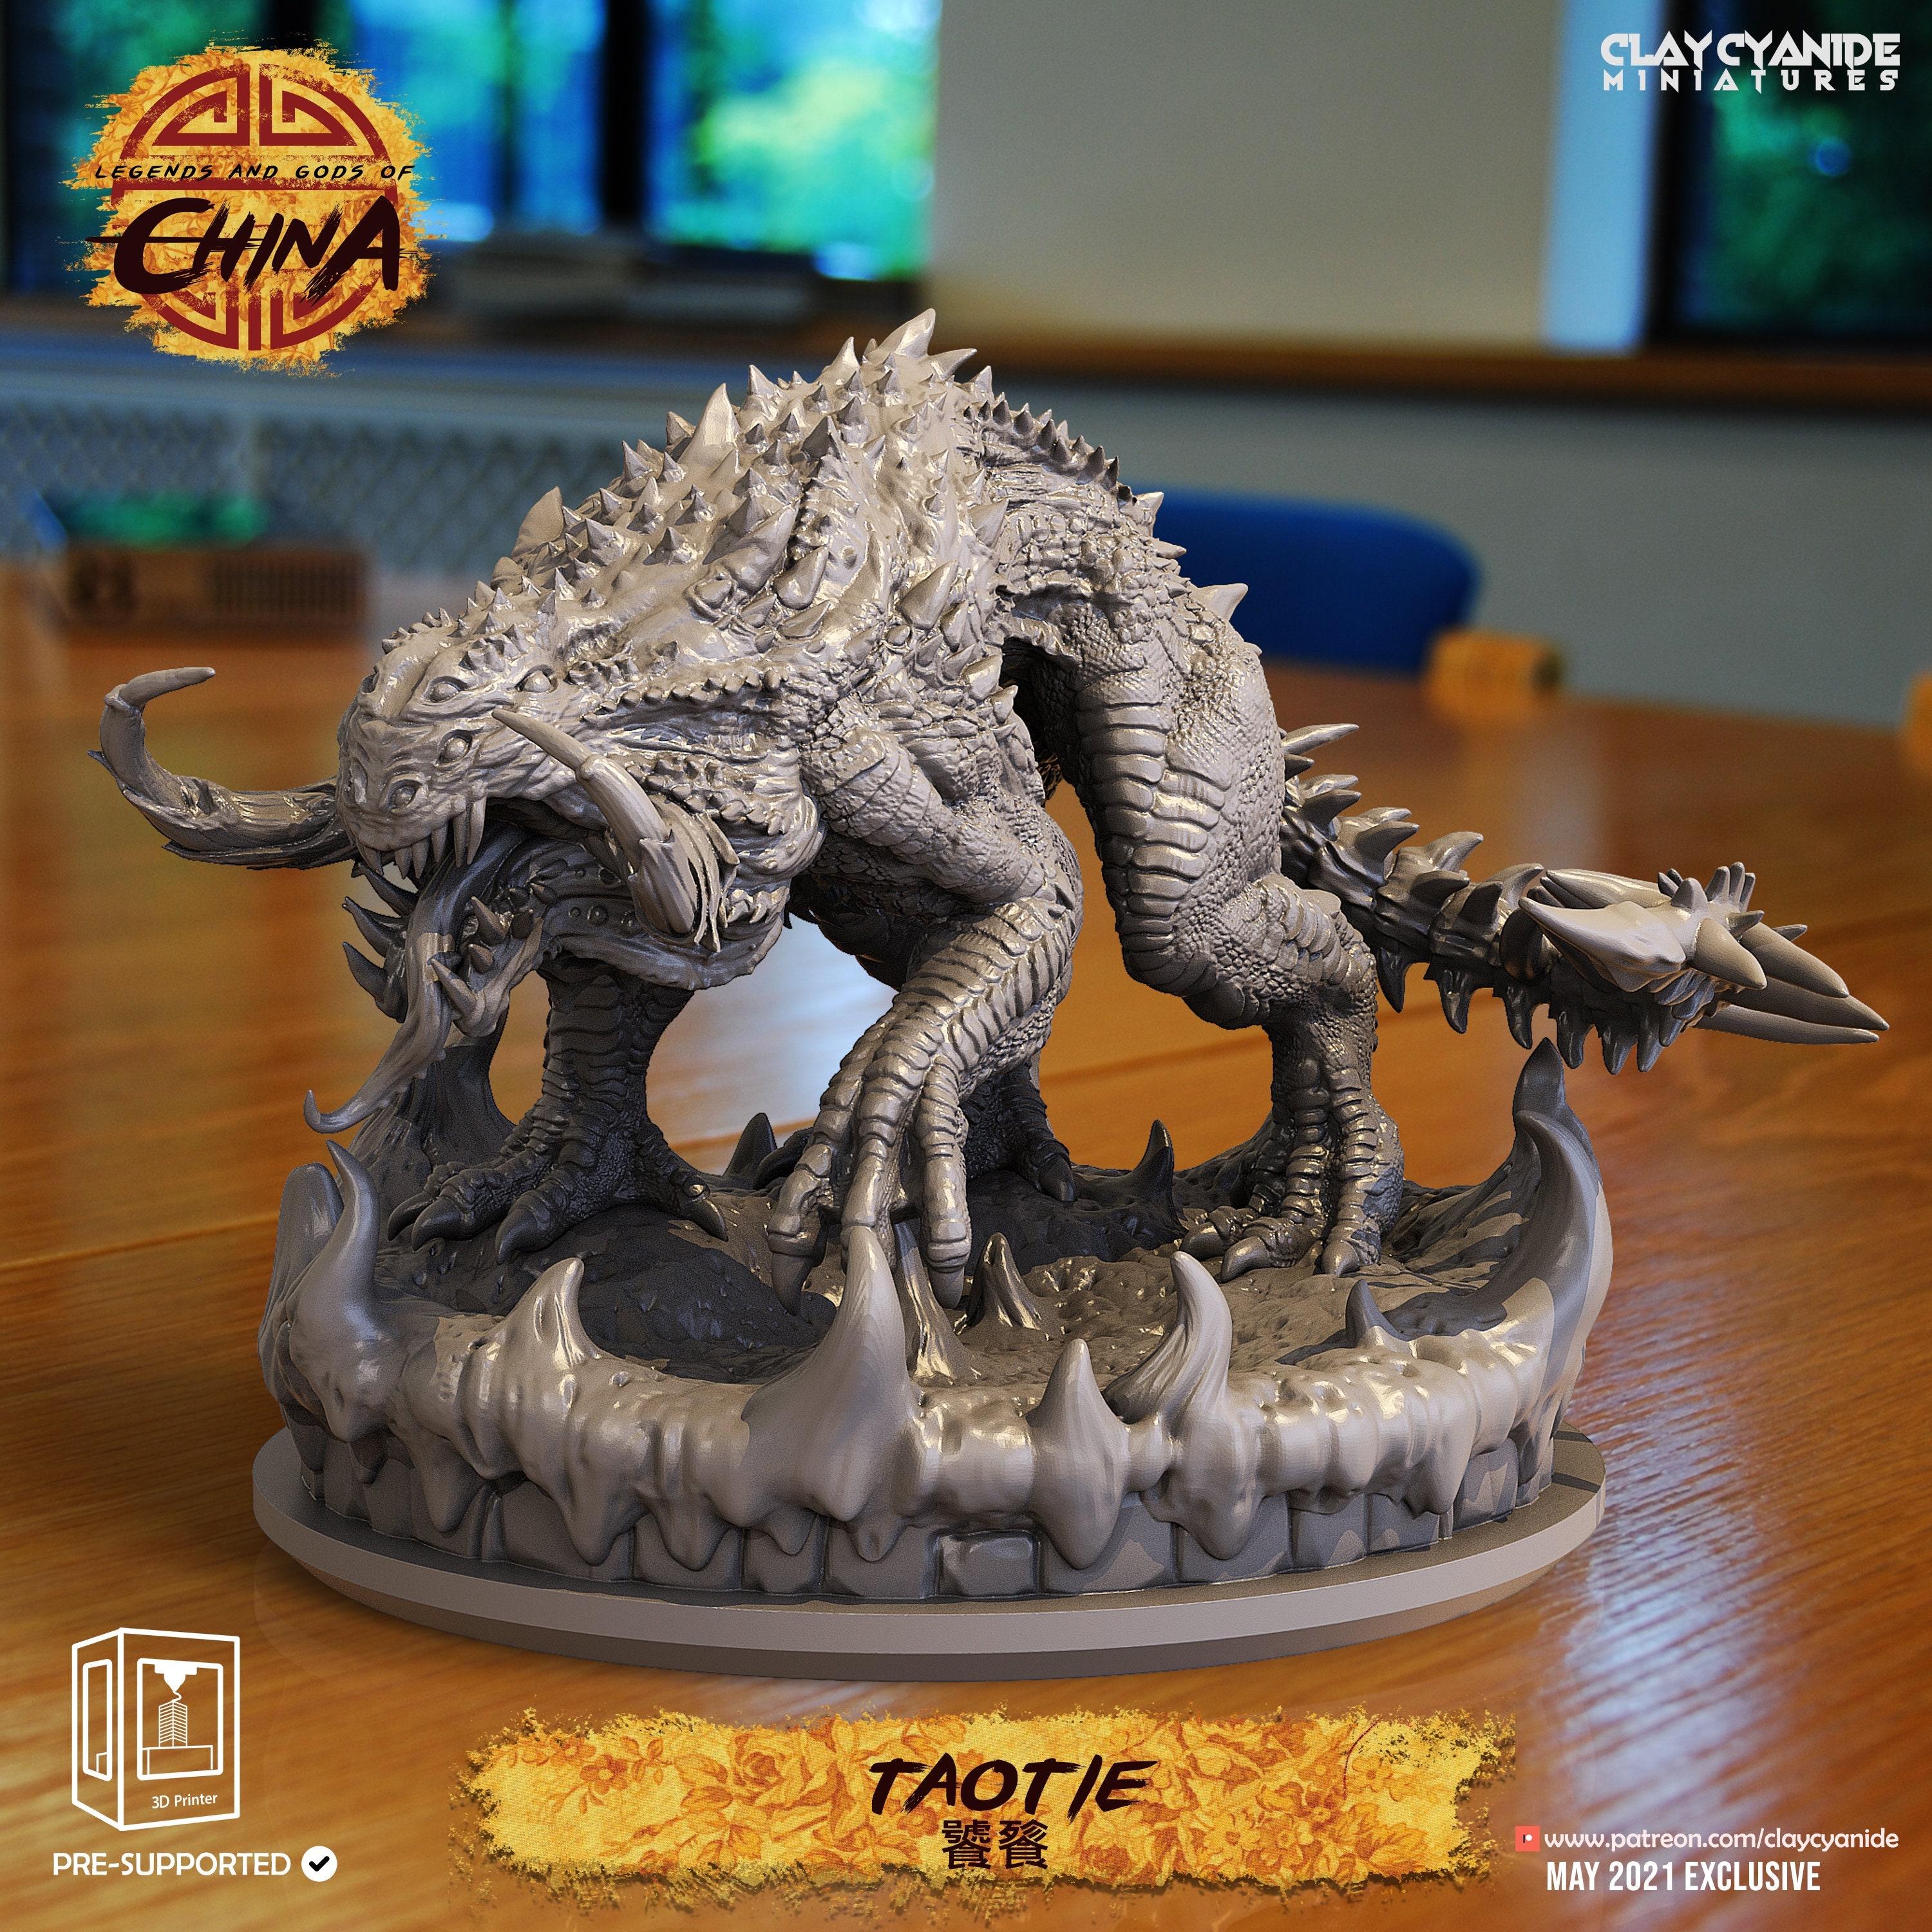 Tabletop Games Dungeons and Dragons Wargames Resin Miniature Black Tortoise \u2022 Legends and Gods of China \u2022 by Clay Cyanide D&D